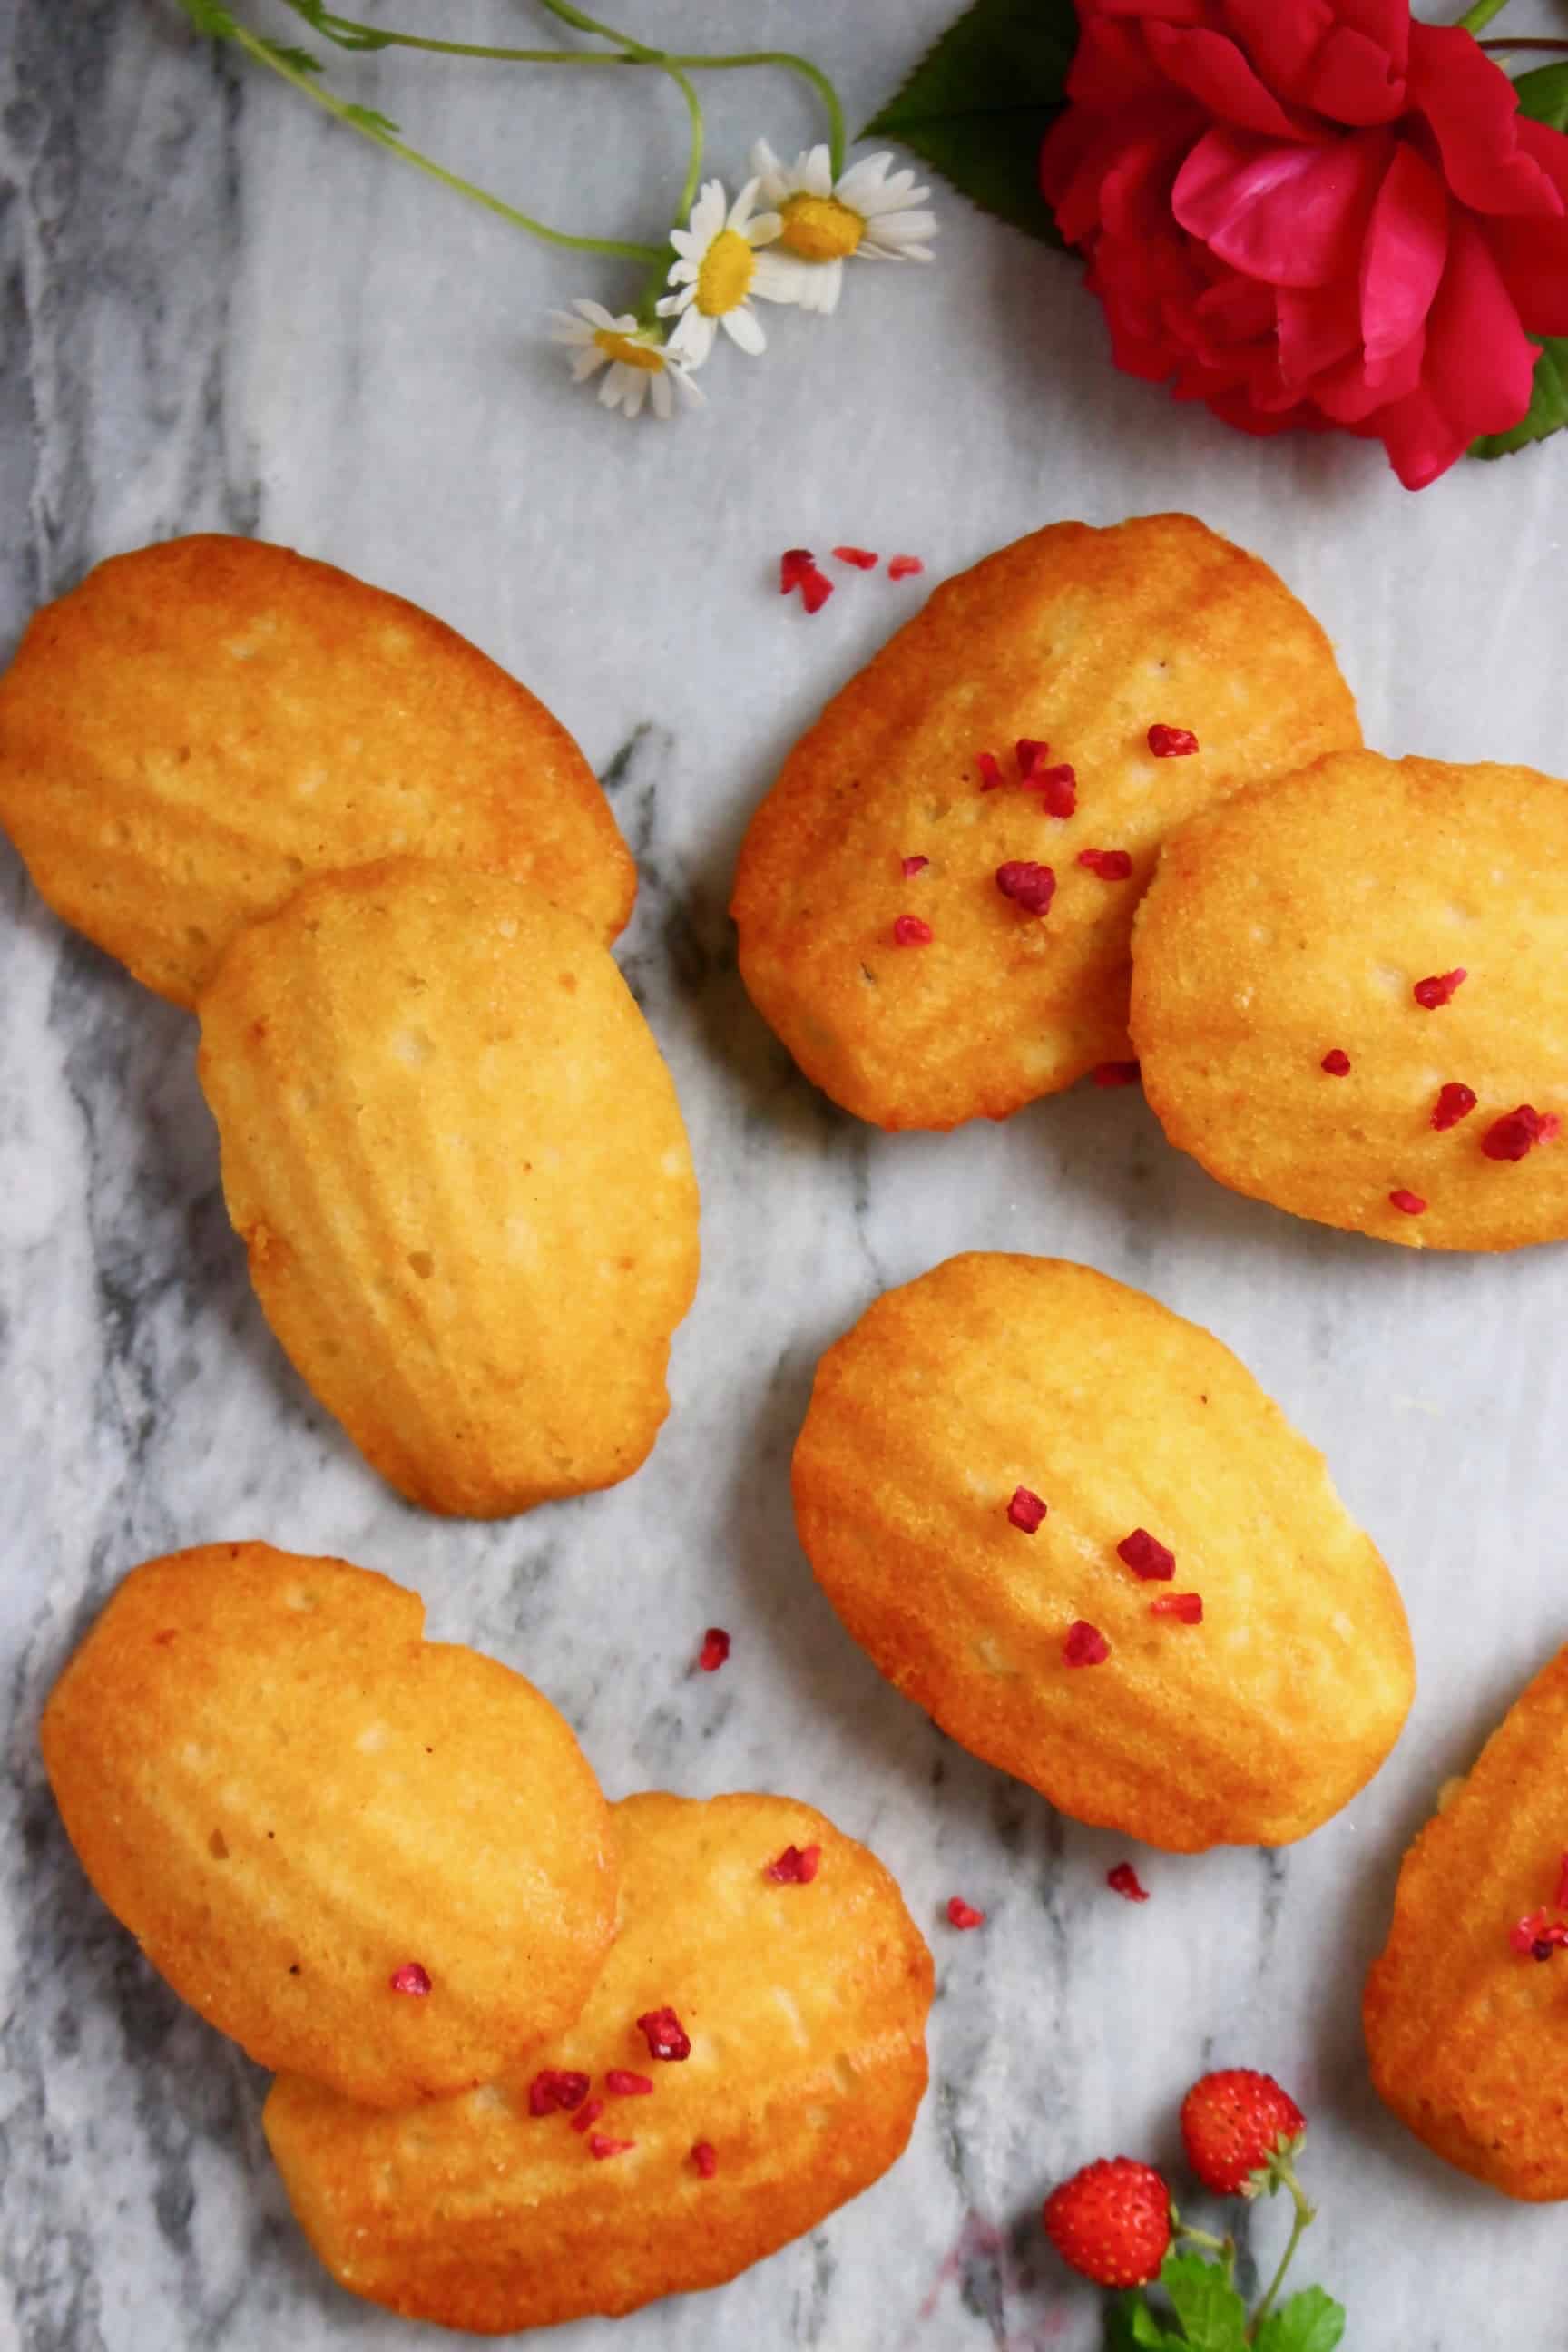 Seven gluten-free vegan madeleines on a marble background decorated with flowers